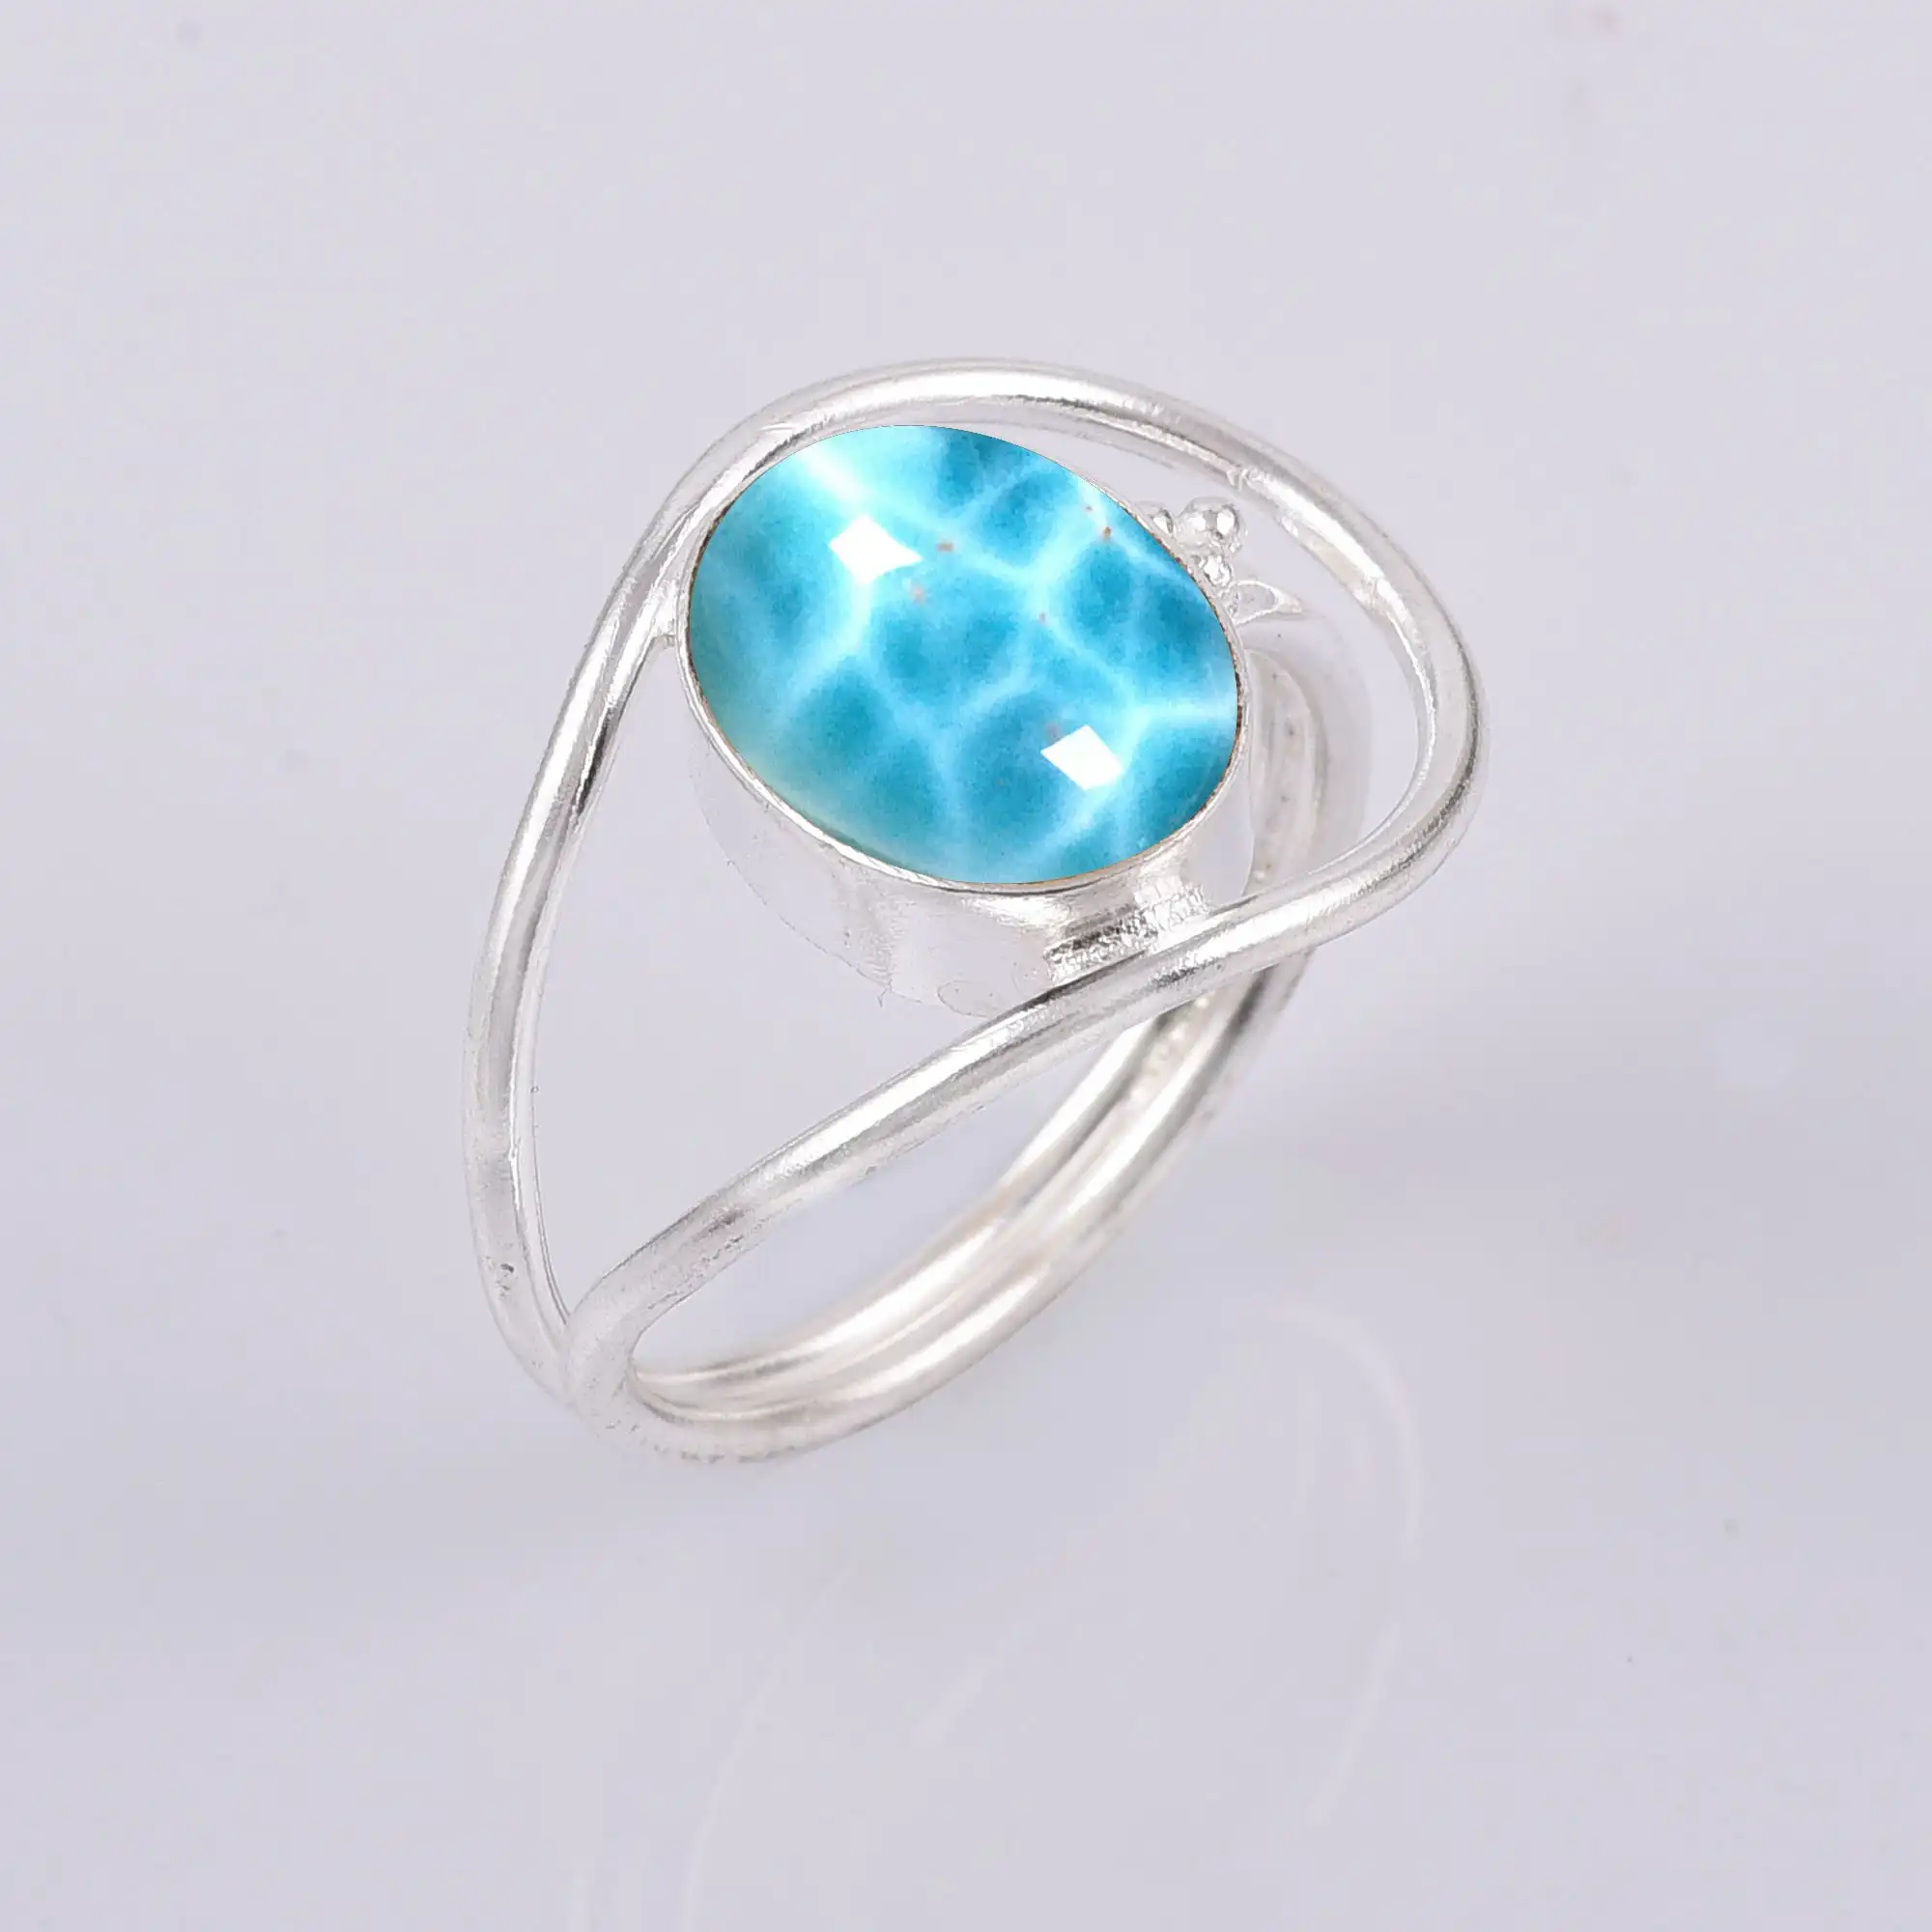 Natural Larimar Blue Gemstone Ring 925 Sterling Silver Filigree Stacking Ring Oval Shape March Genuine Birthstone Gift For Her.